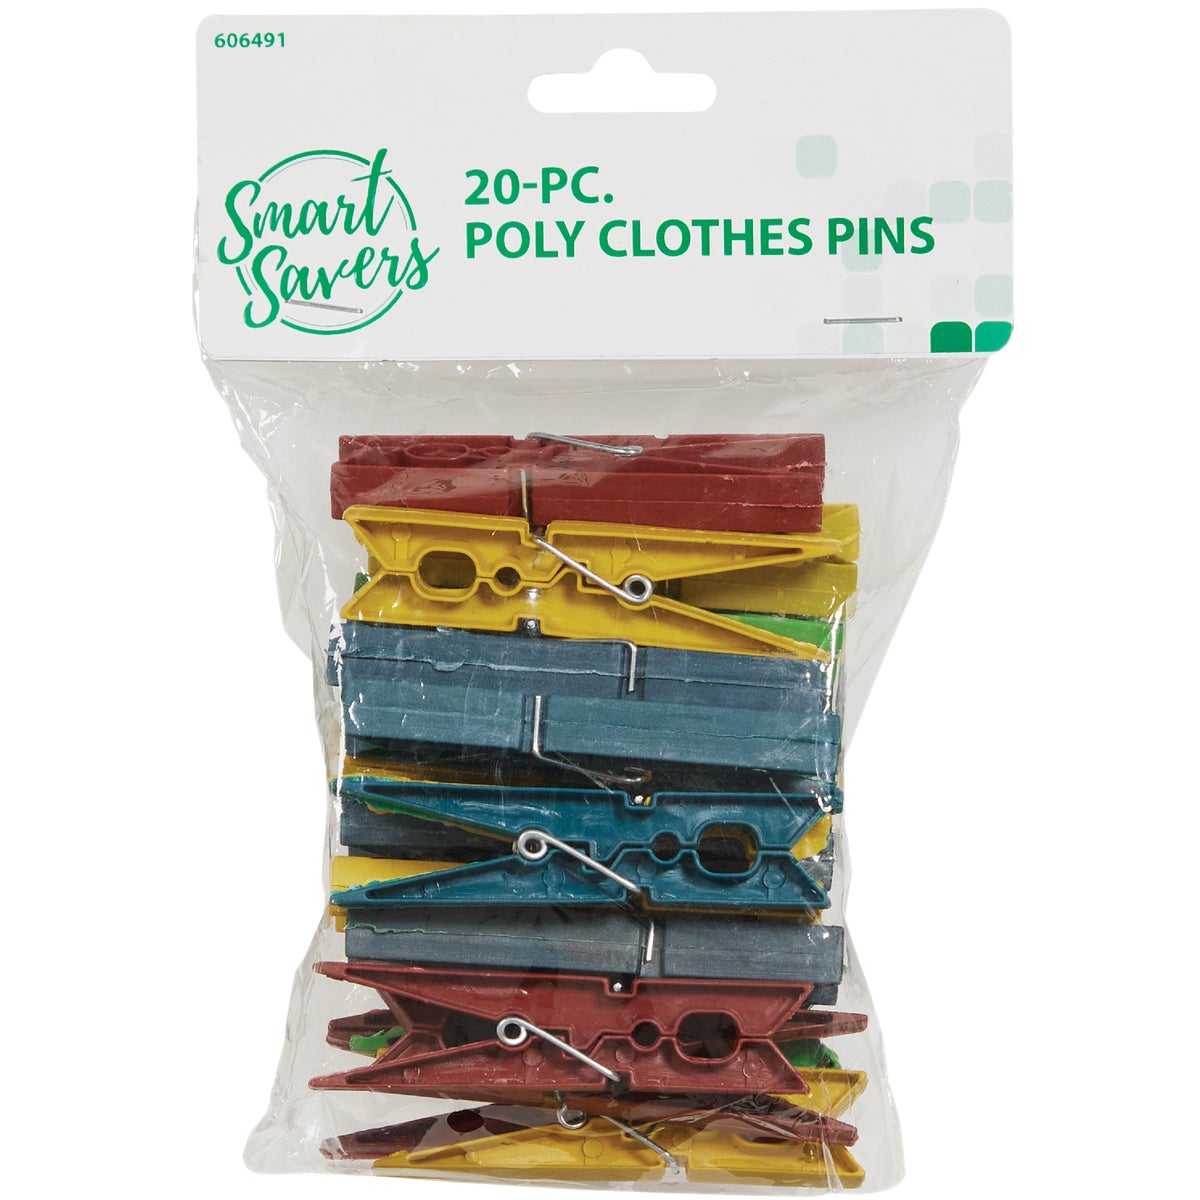 Smart Savers Spring Poly Clothespins (20-Pack)